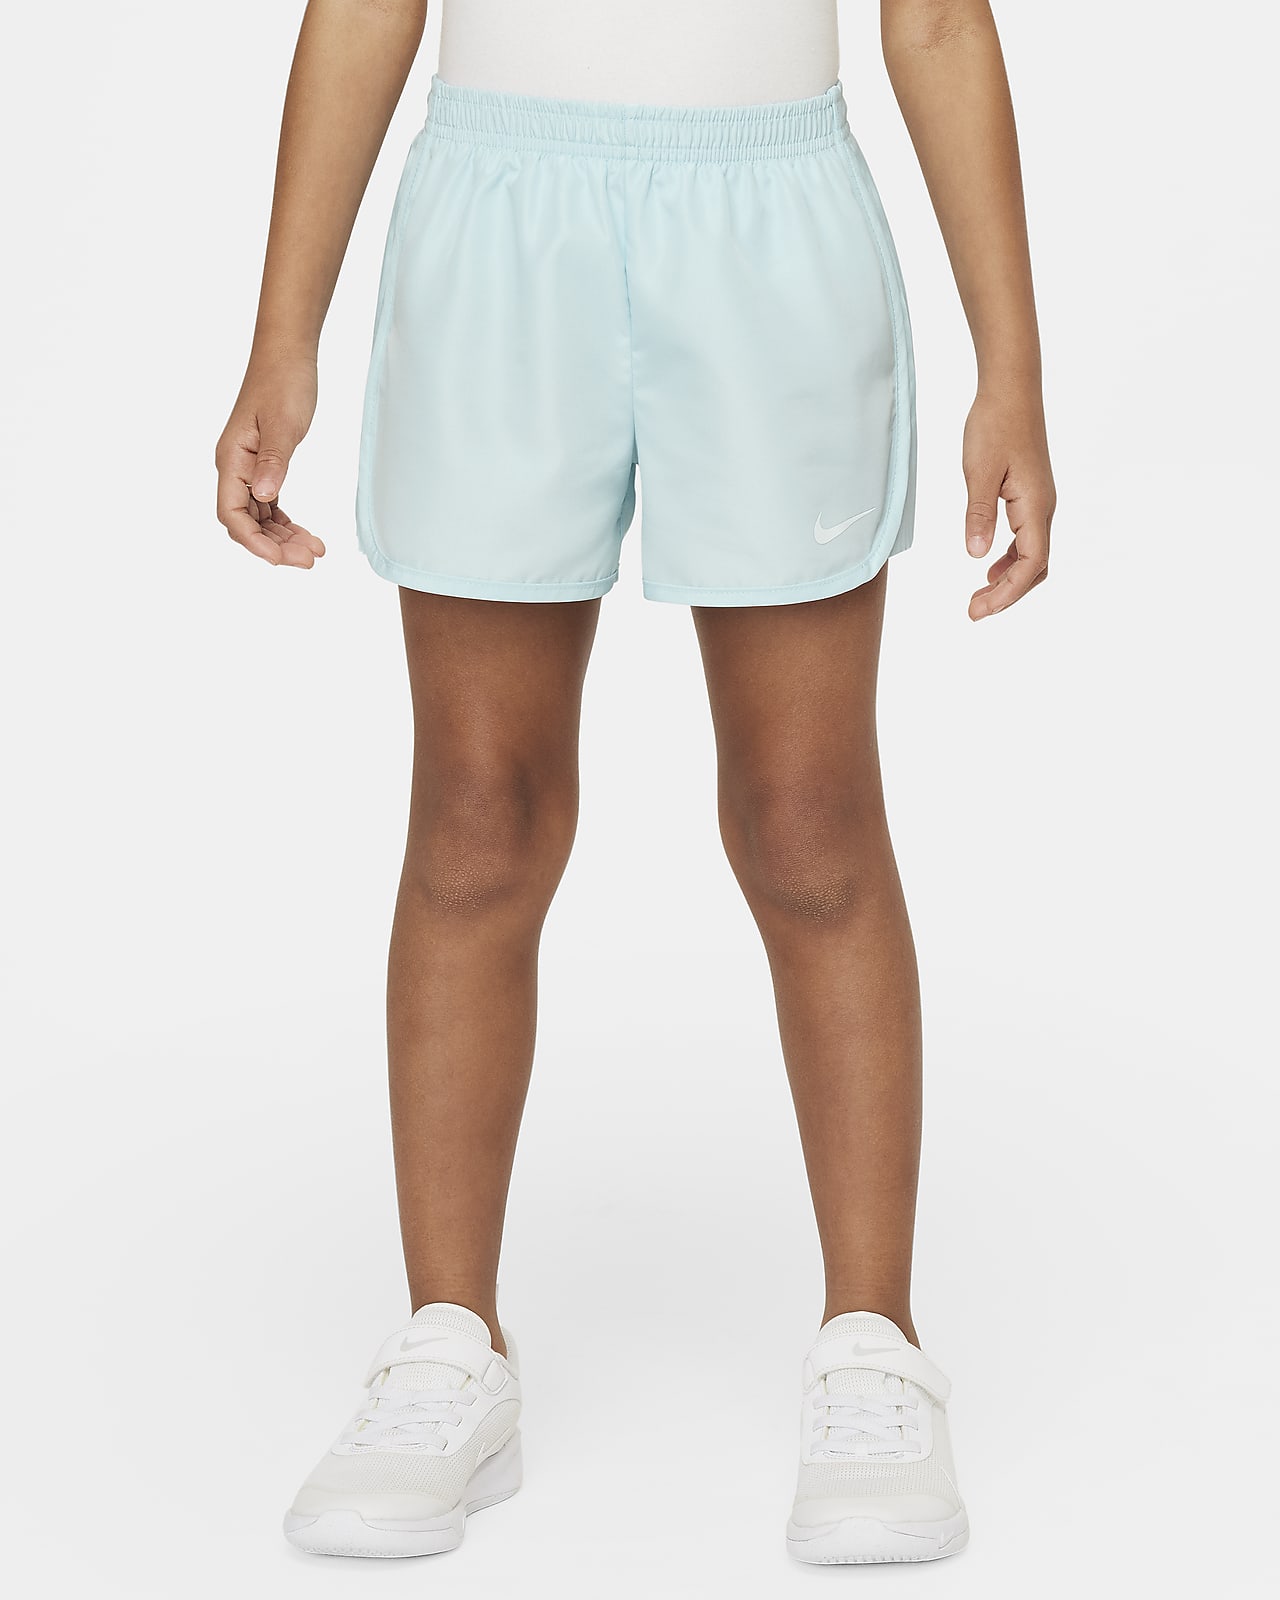 Nike Prep in Your Step Little Kids' Dri-FIT Pleated Tempo Shorts